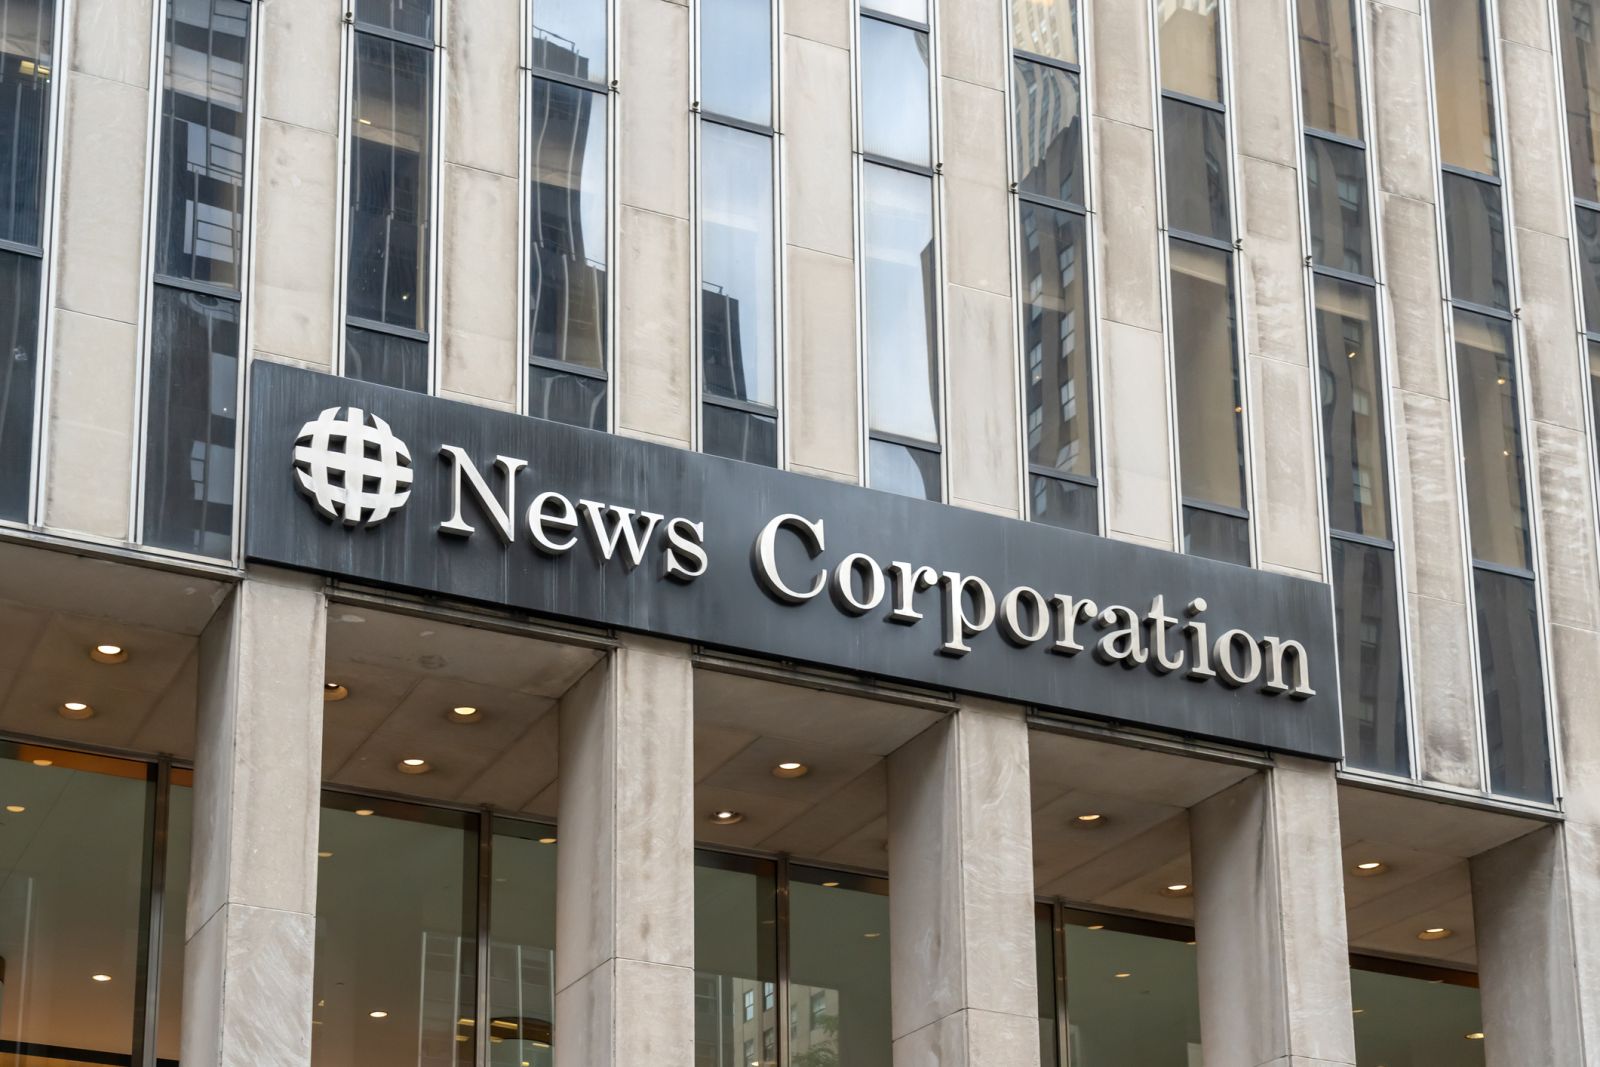 Communication Services - News Corp signage by- JHVEPhoto via iStock